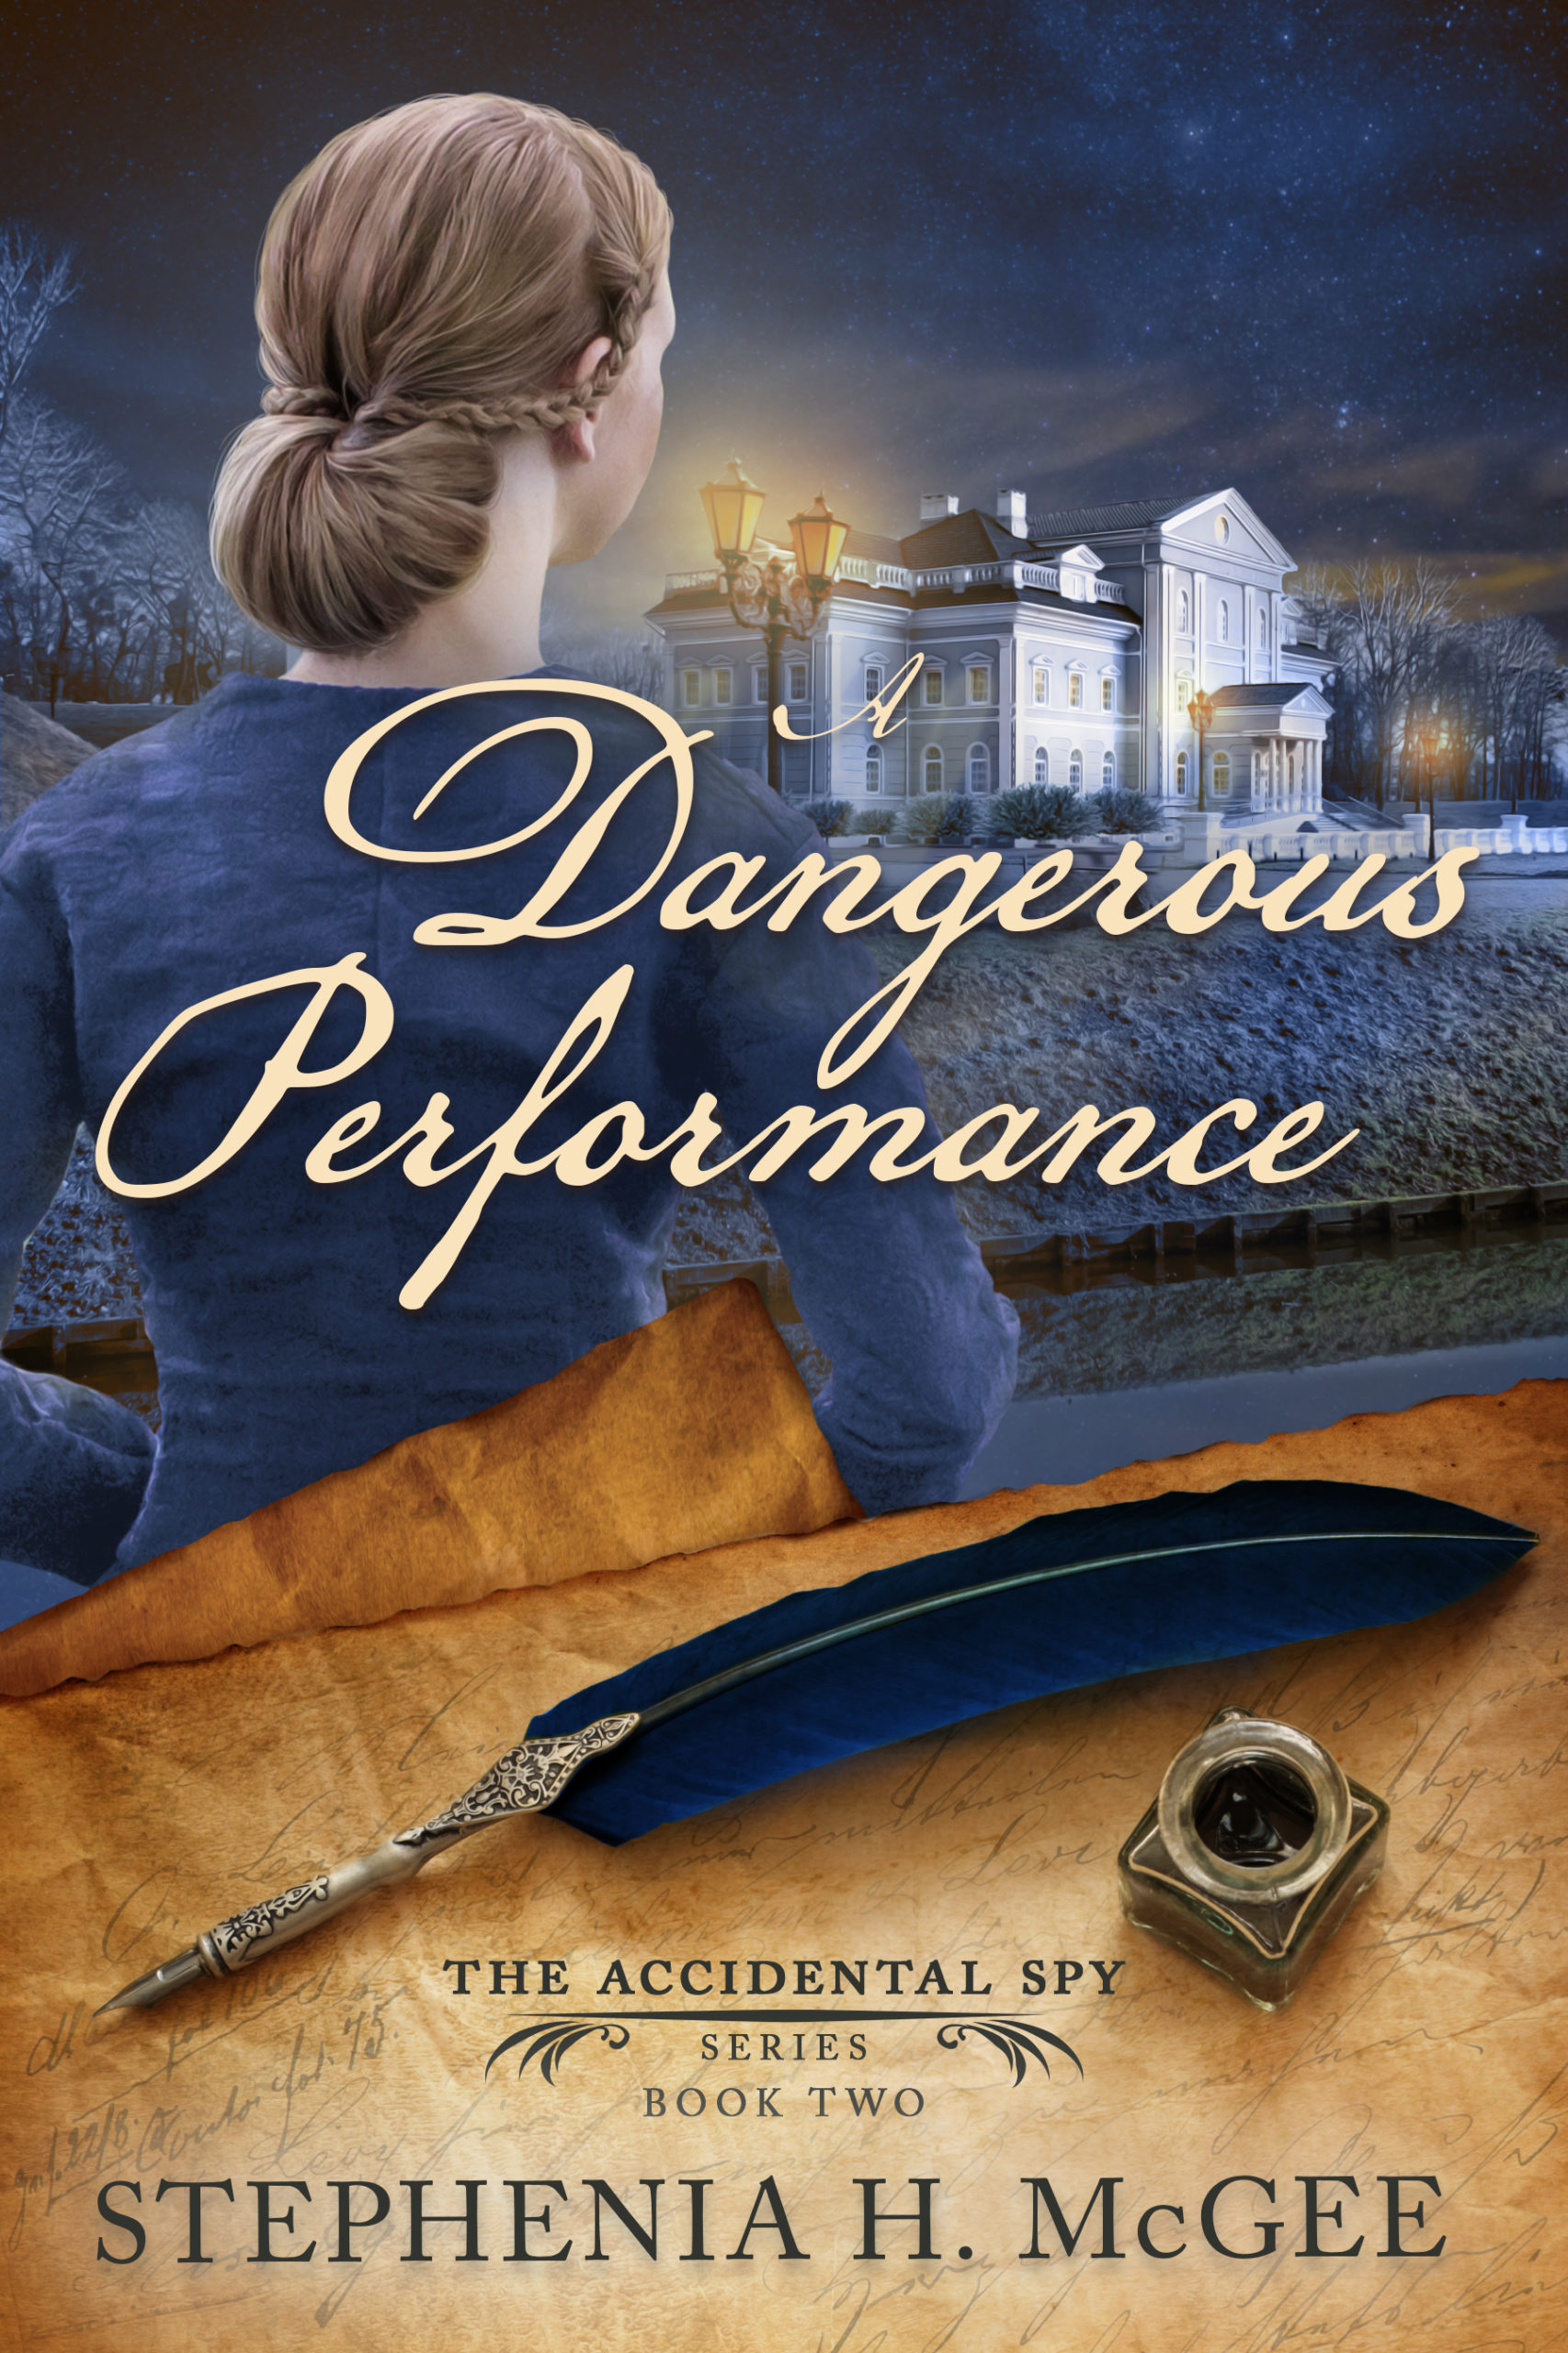 Featured image for “A Dangerous Performance”